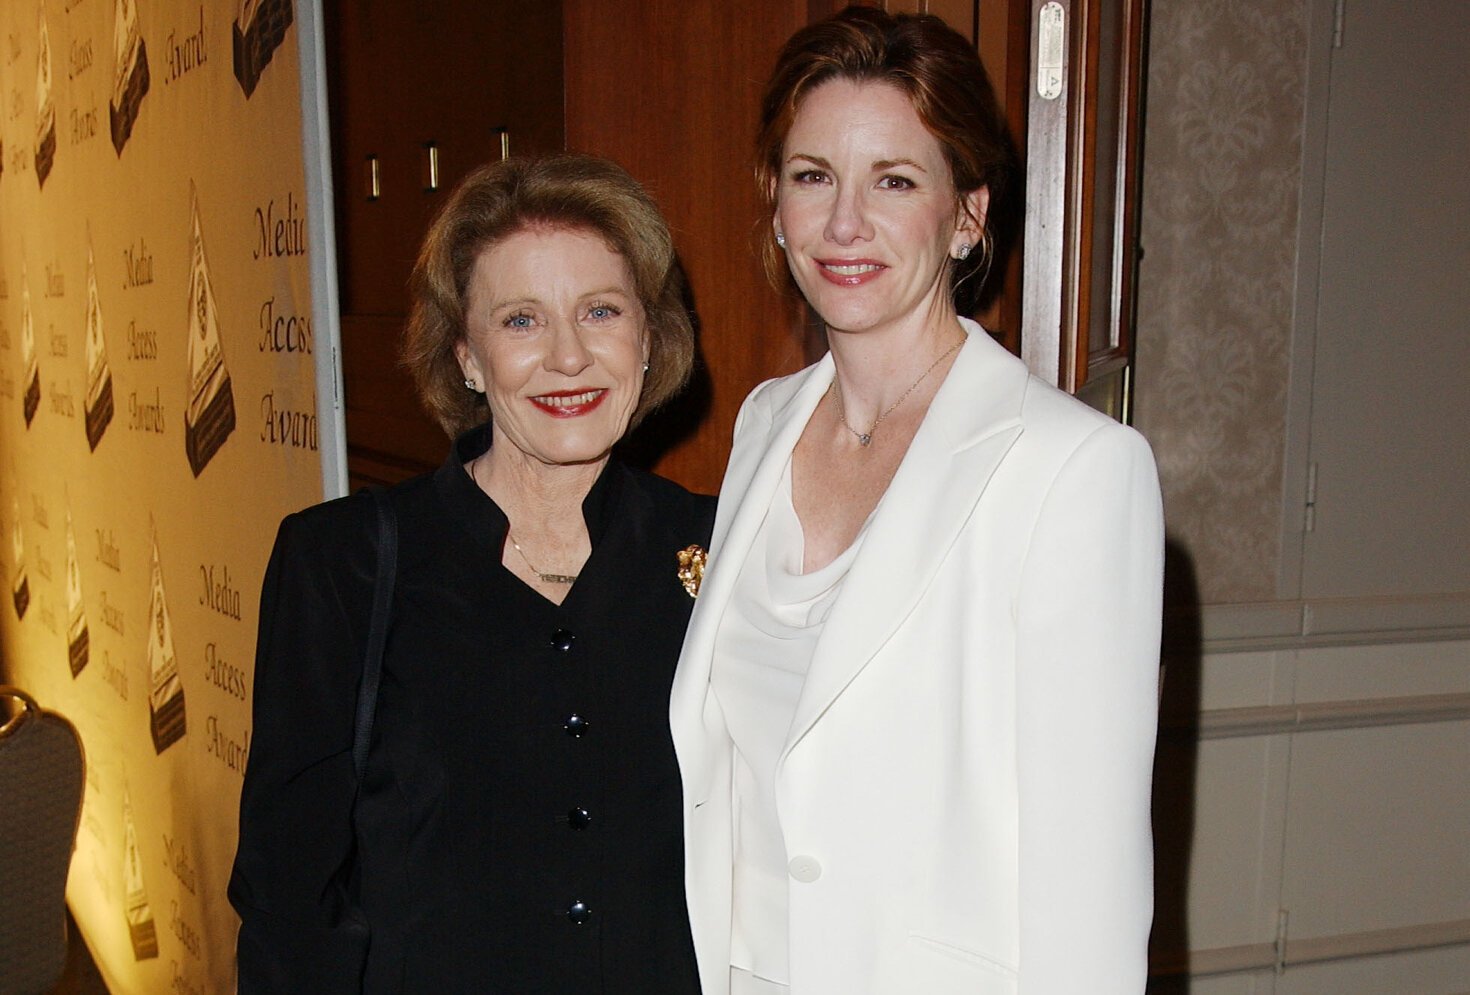 Patty Duke and Melissa Gilbert pose at the 20th Annual Media Access Awards.